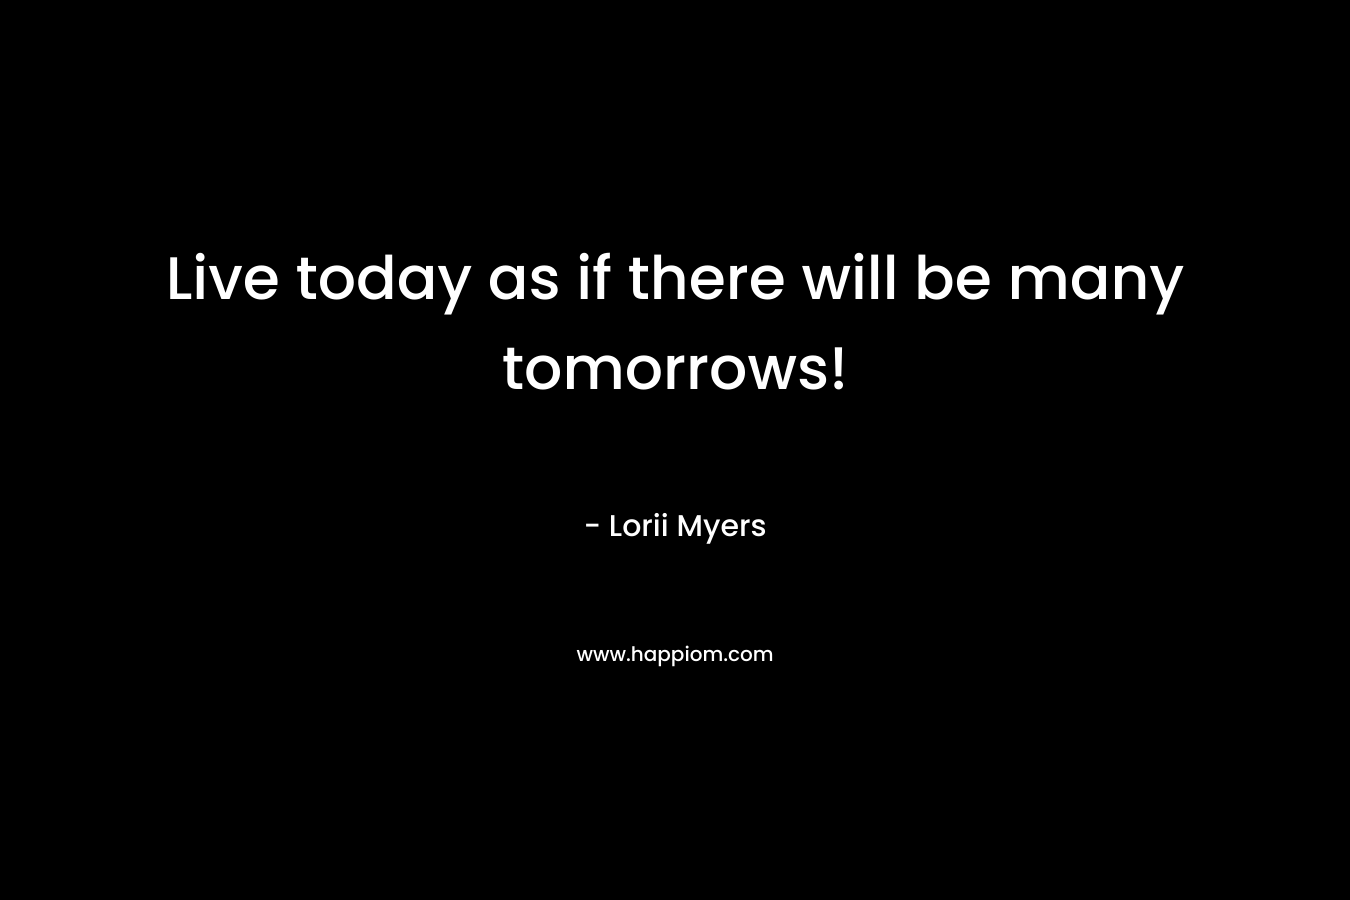 Live today as if there will be many tomorrows! – Lorii Myers